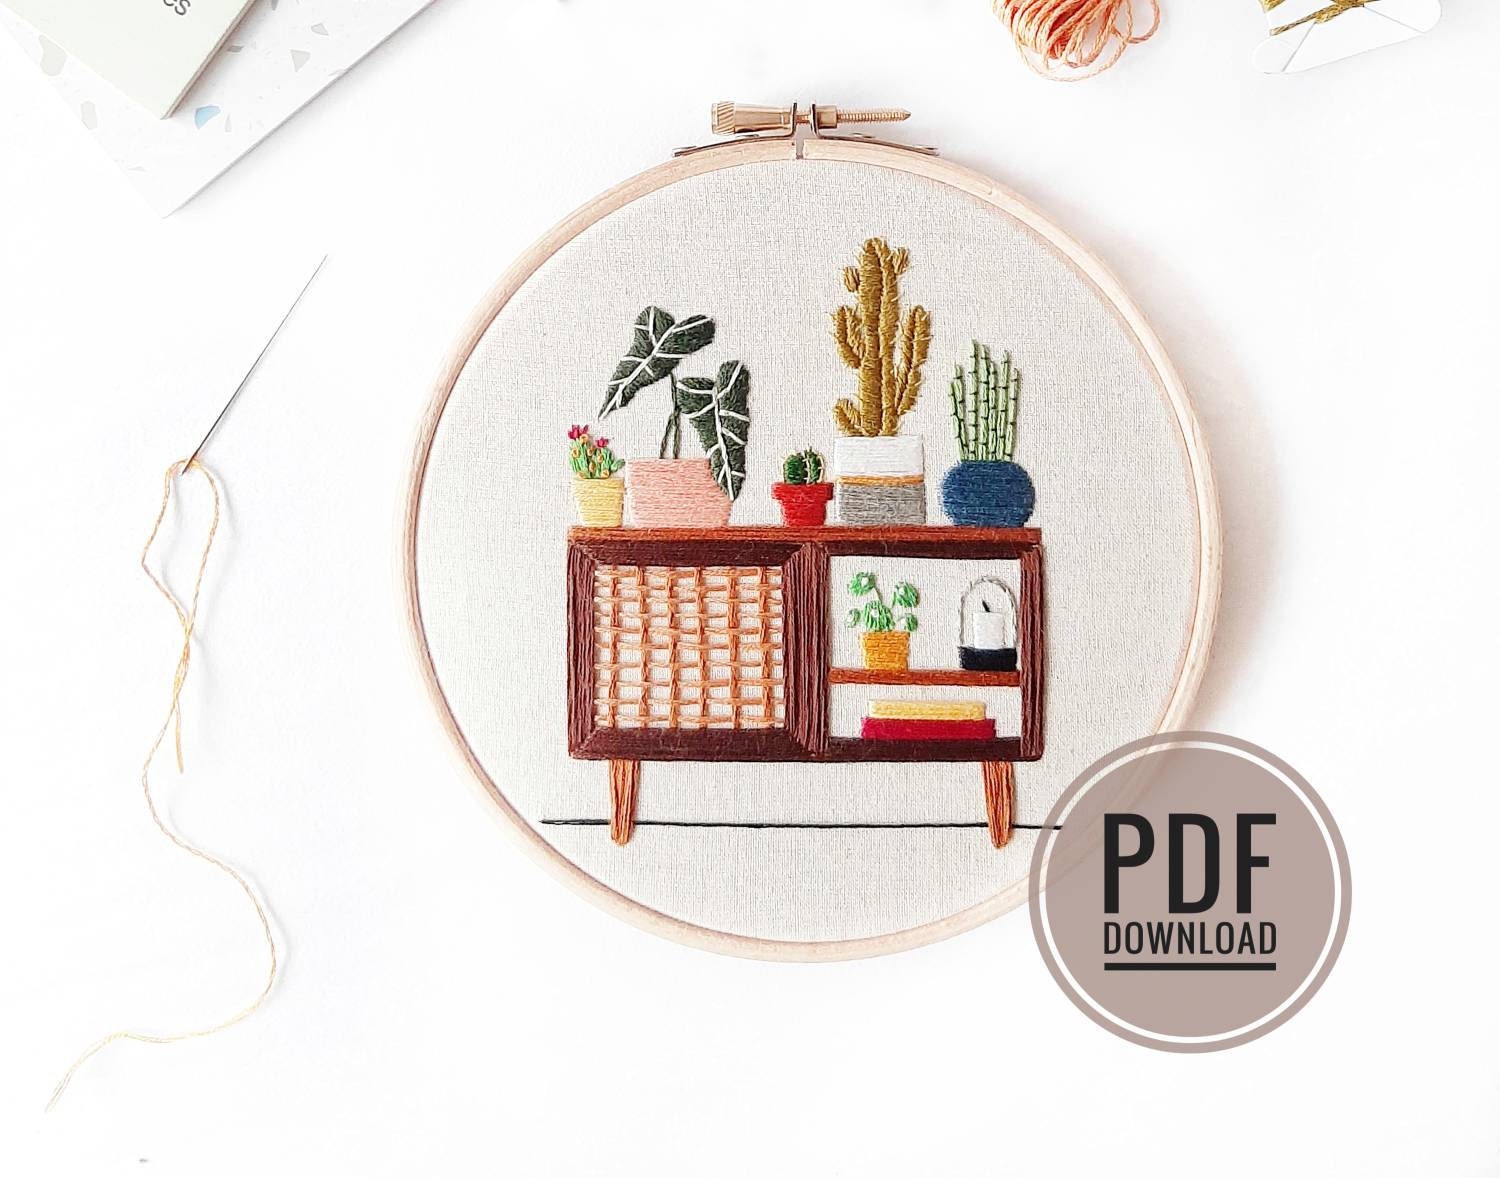 Embroidery Journal In-depth Guide PDF 